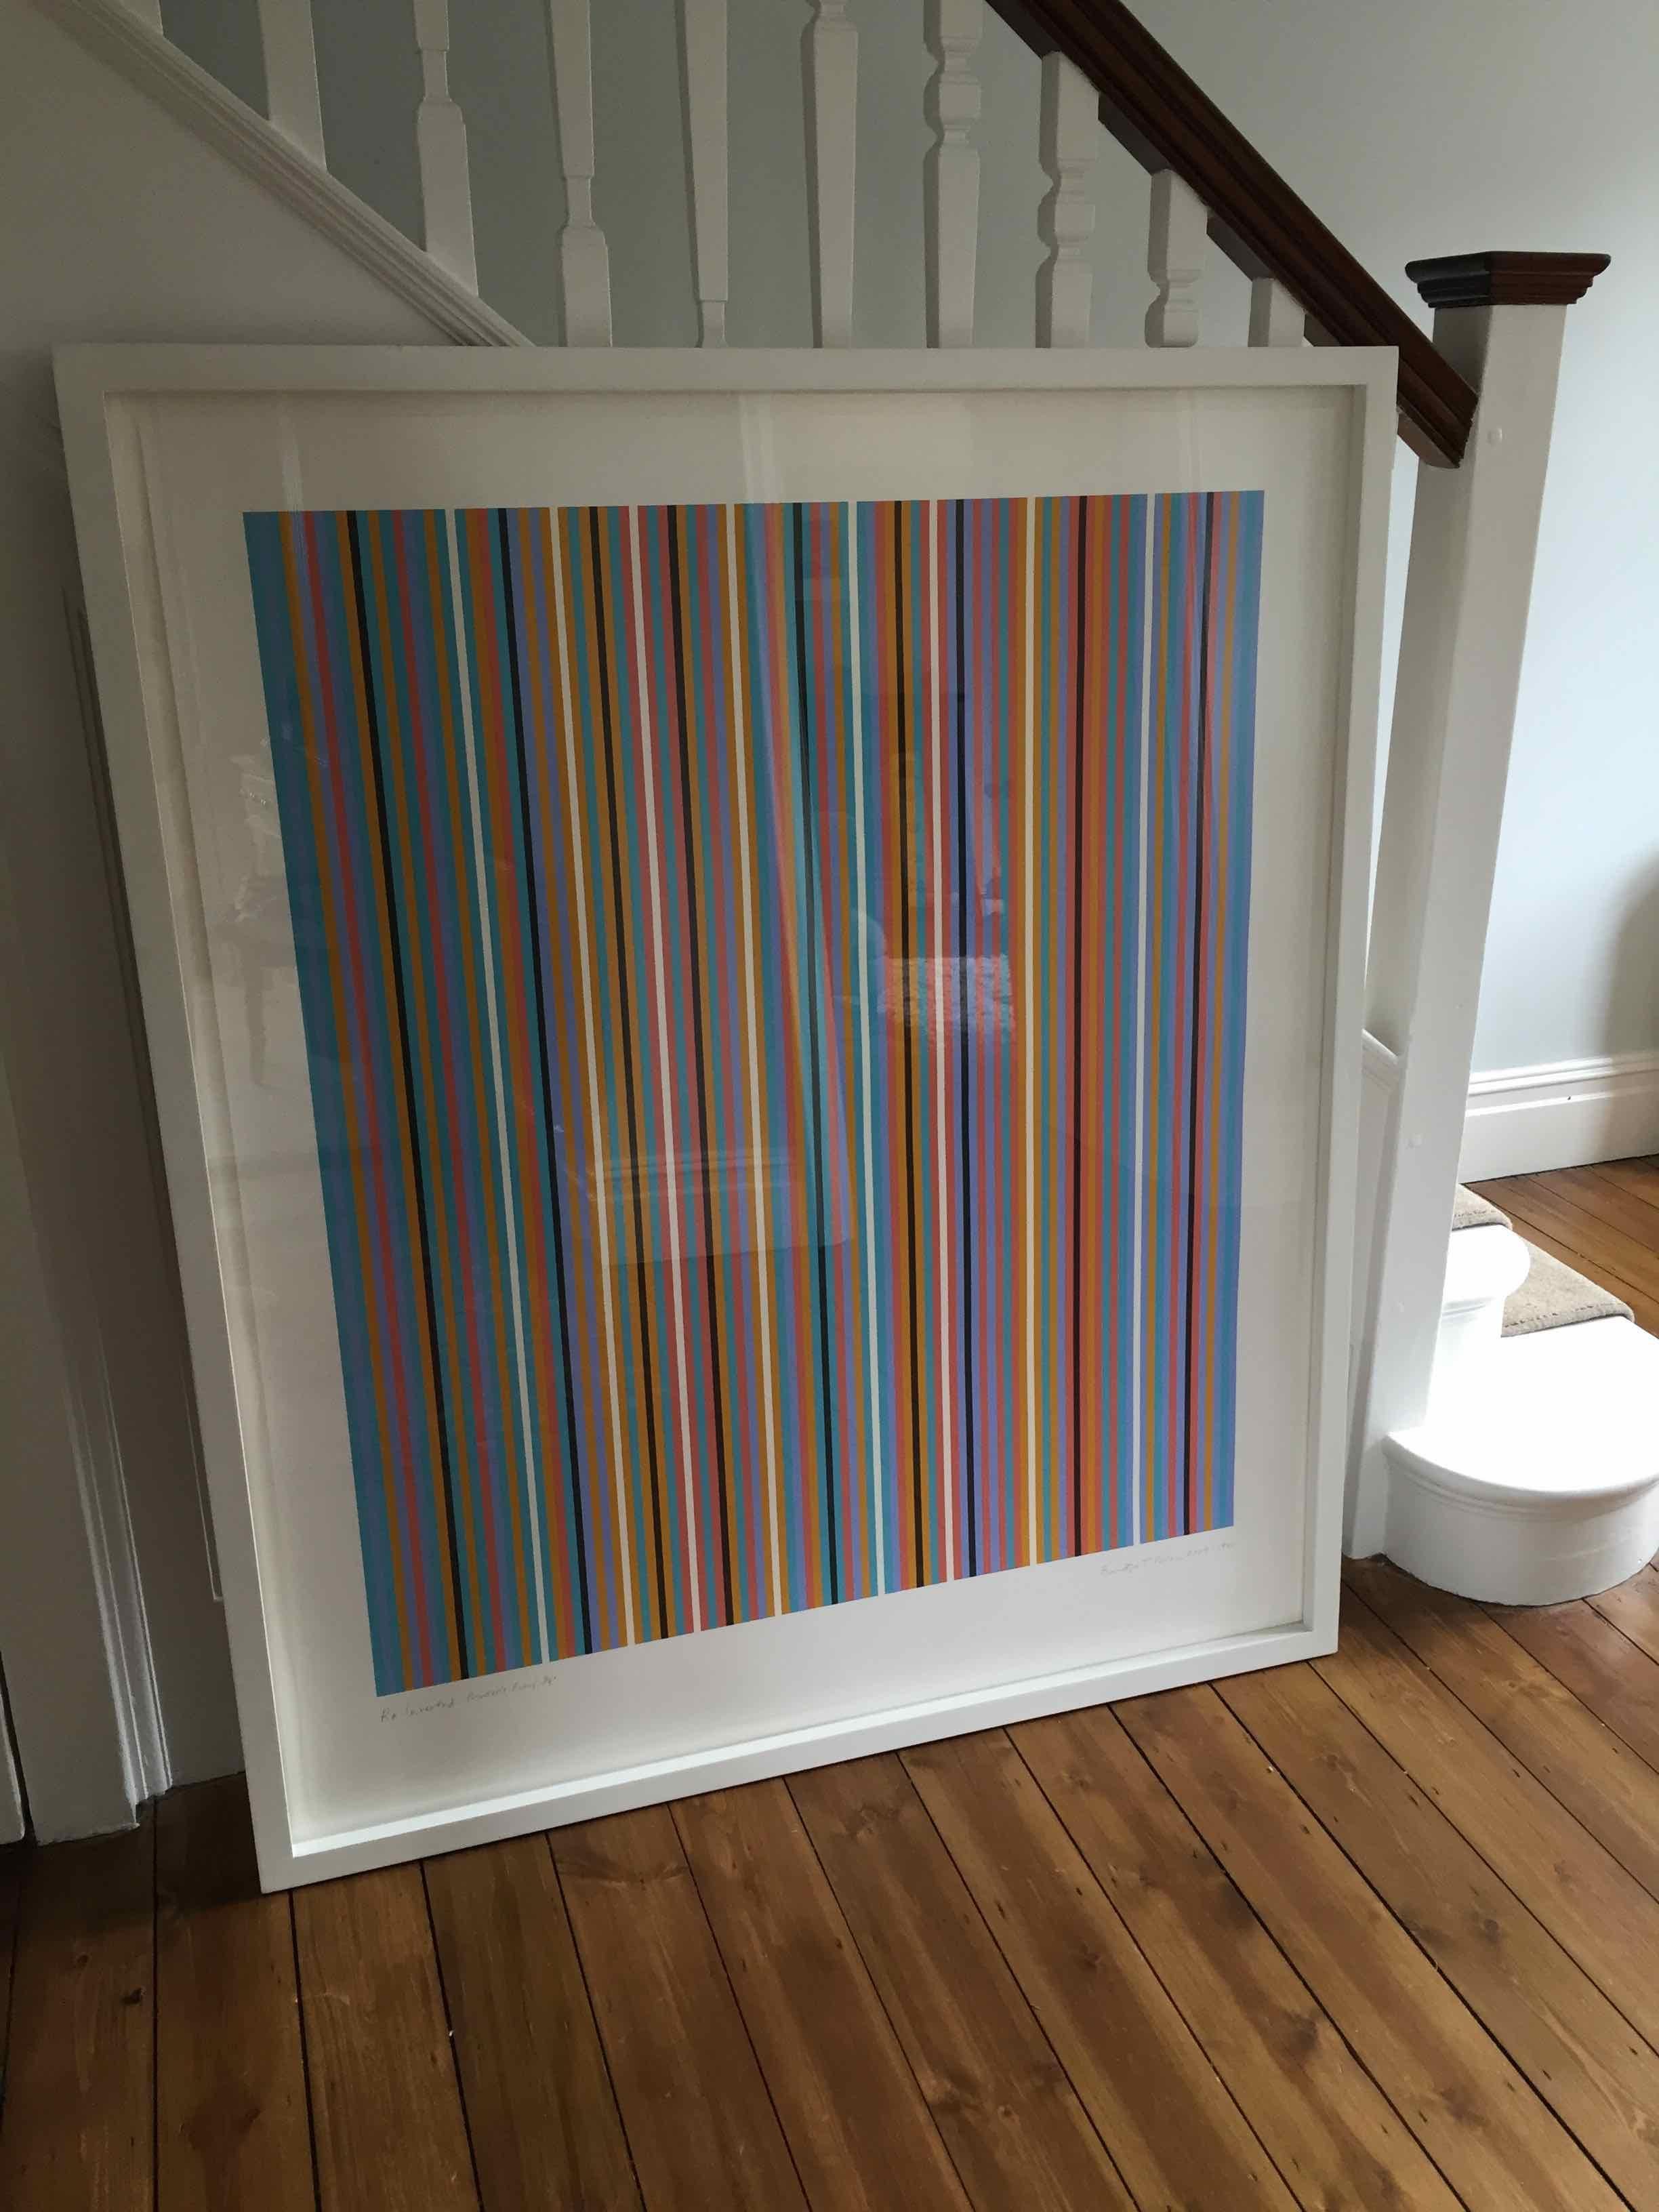 Ra Inverted (Schubert 69), Limited Edition Screen Print by Bridget Riley 1